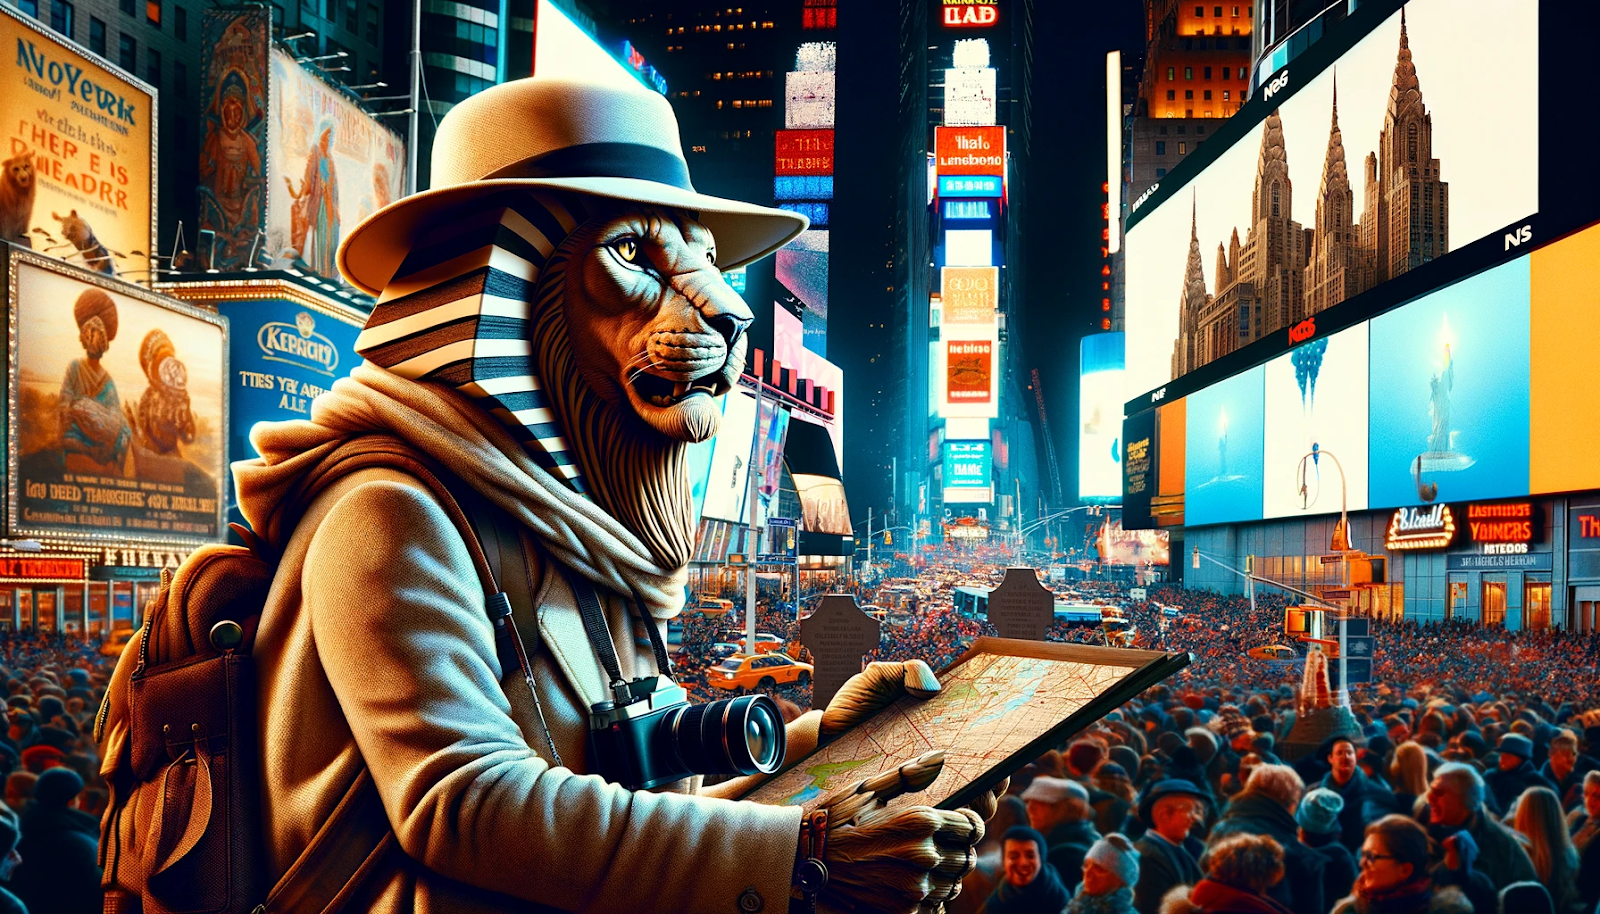 “Sphinx dressed as a tourist visiting new york city times square on new years eve photo”